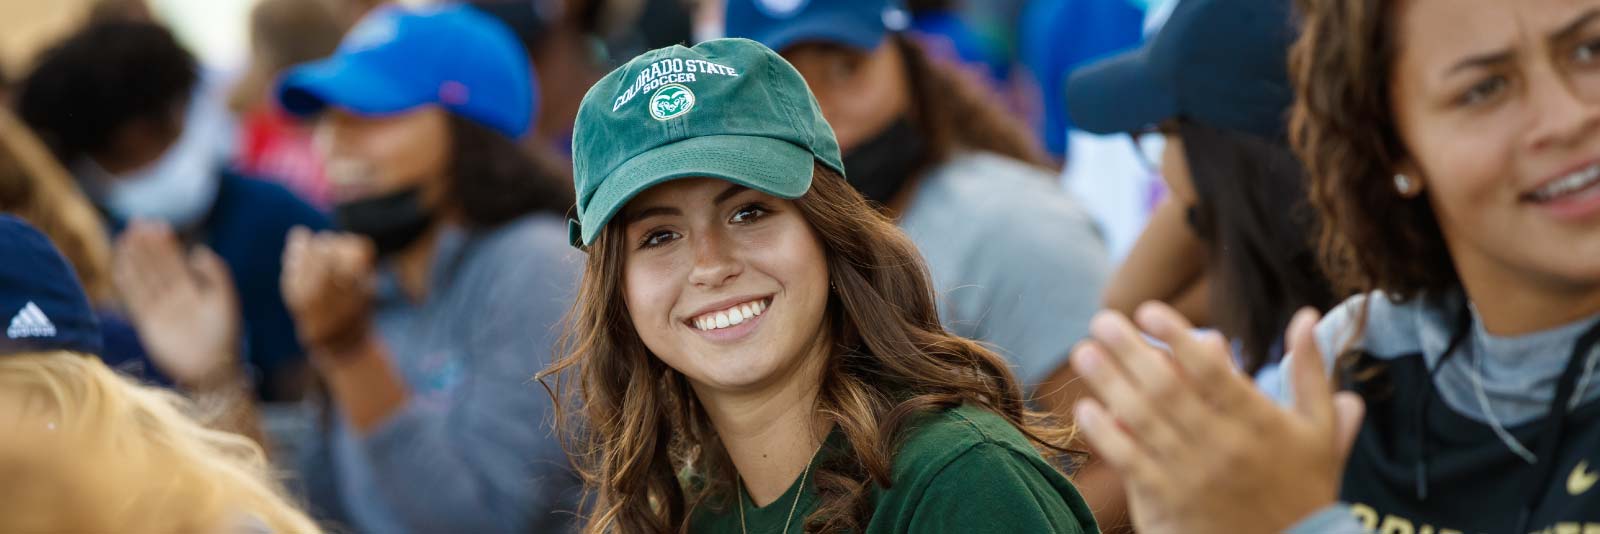 girl with a colorado state hat